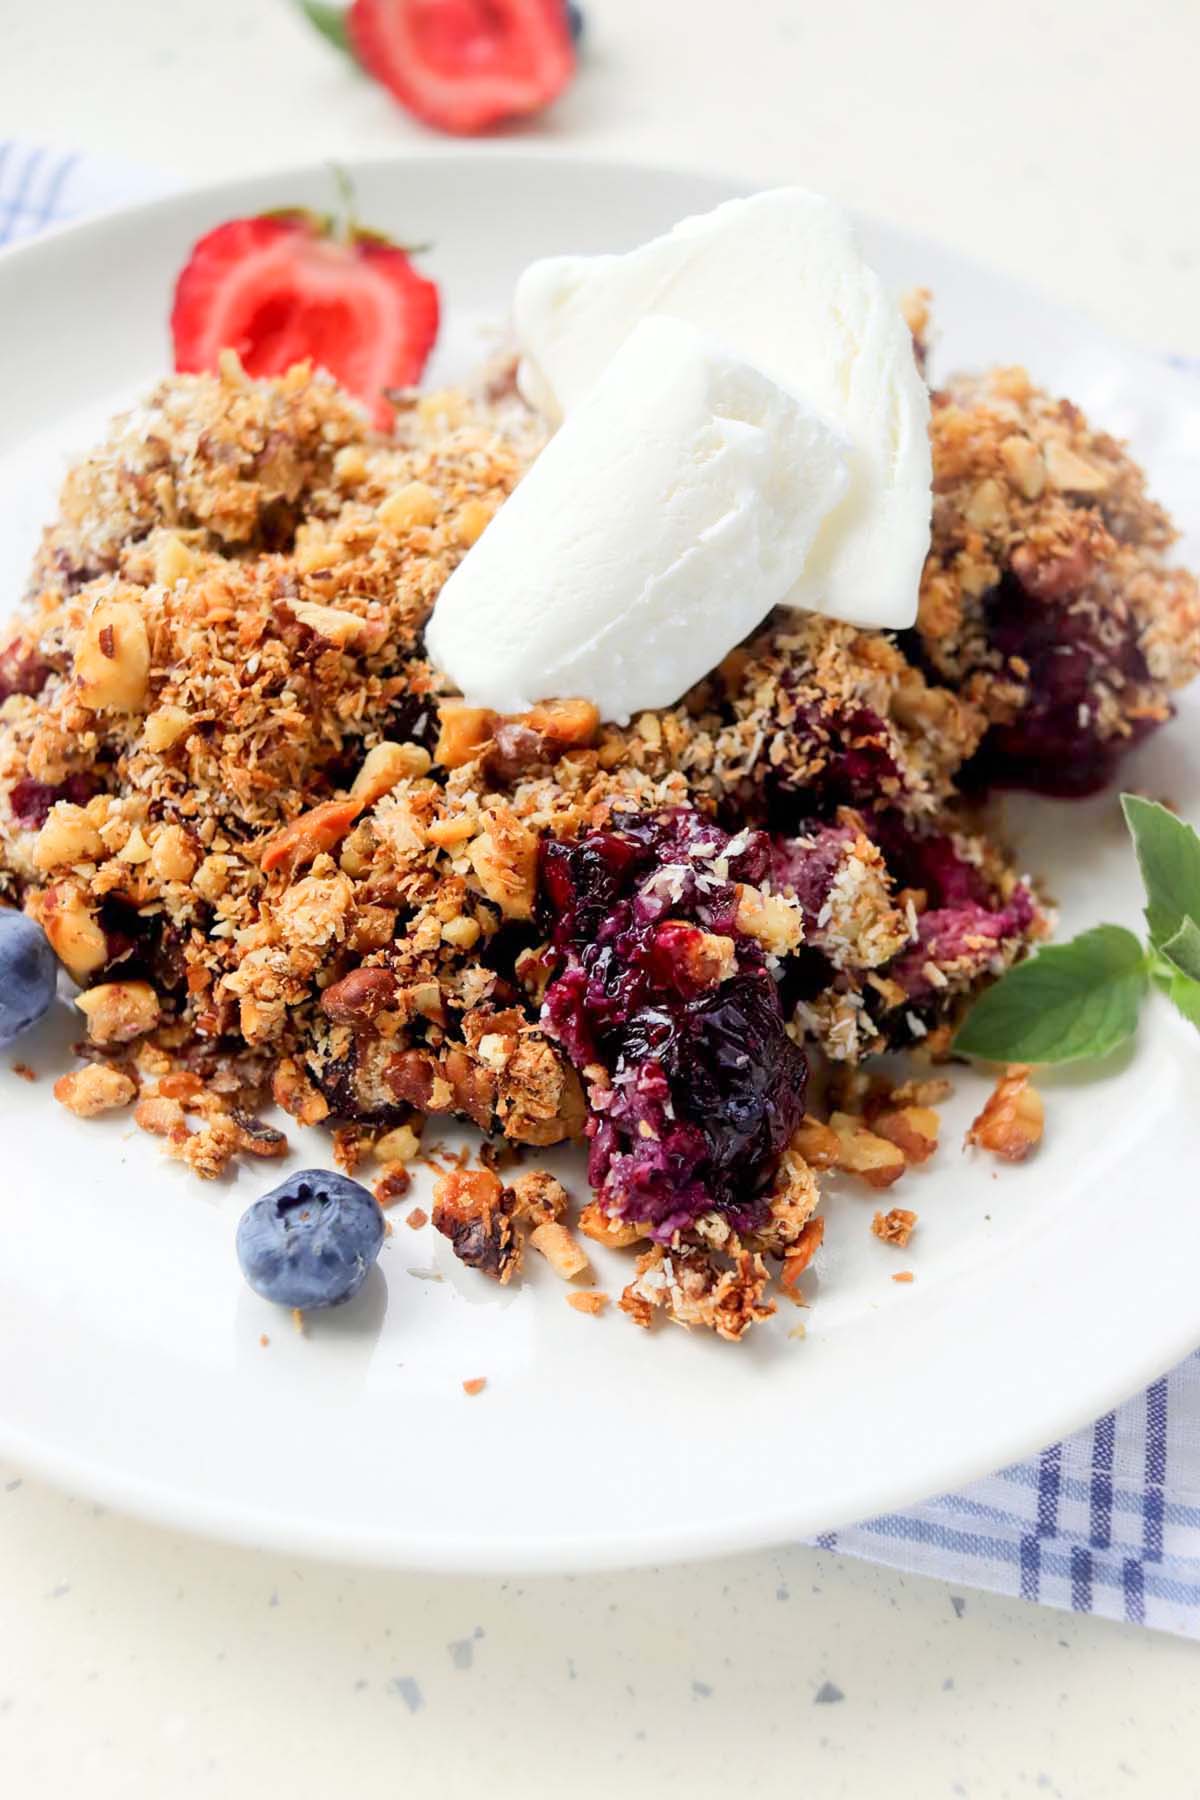 Berry crumble topped with whipped cream.